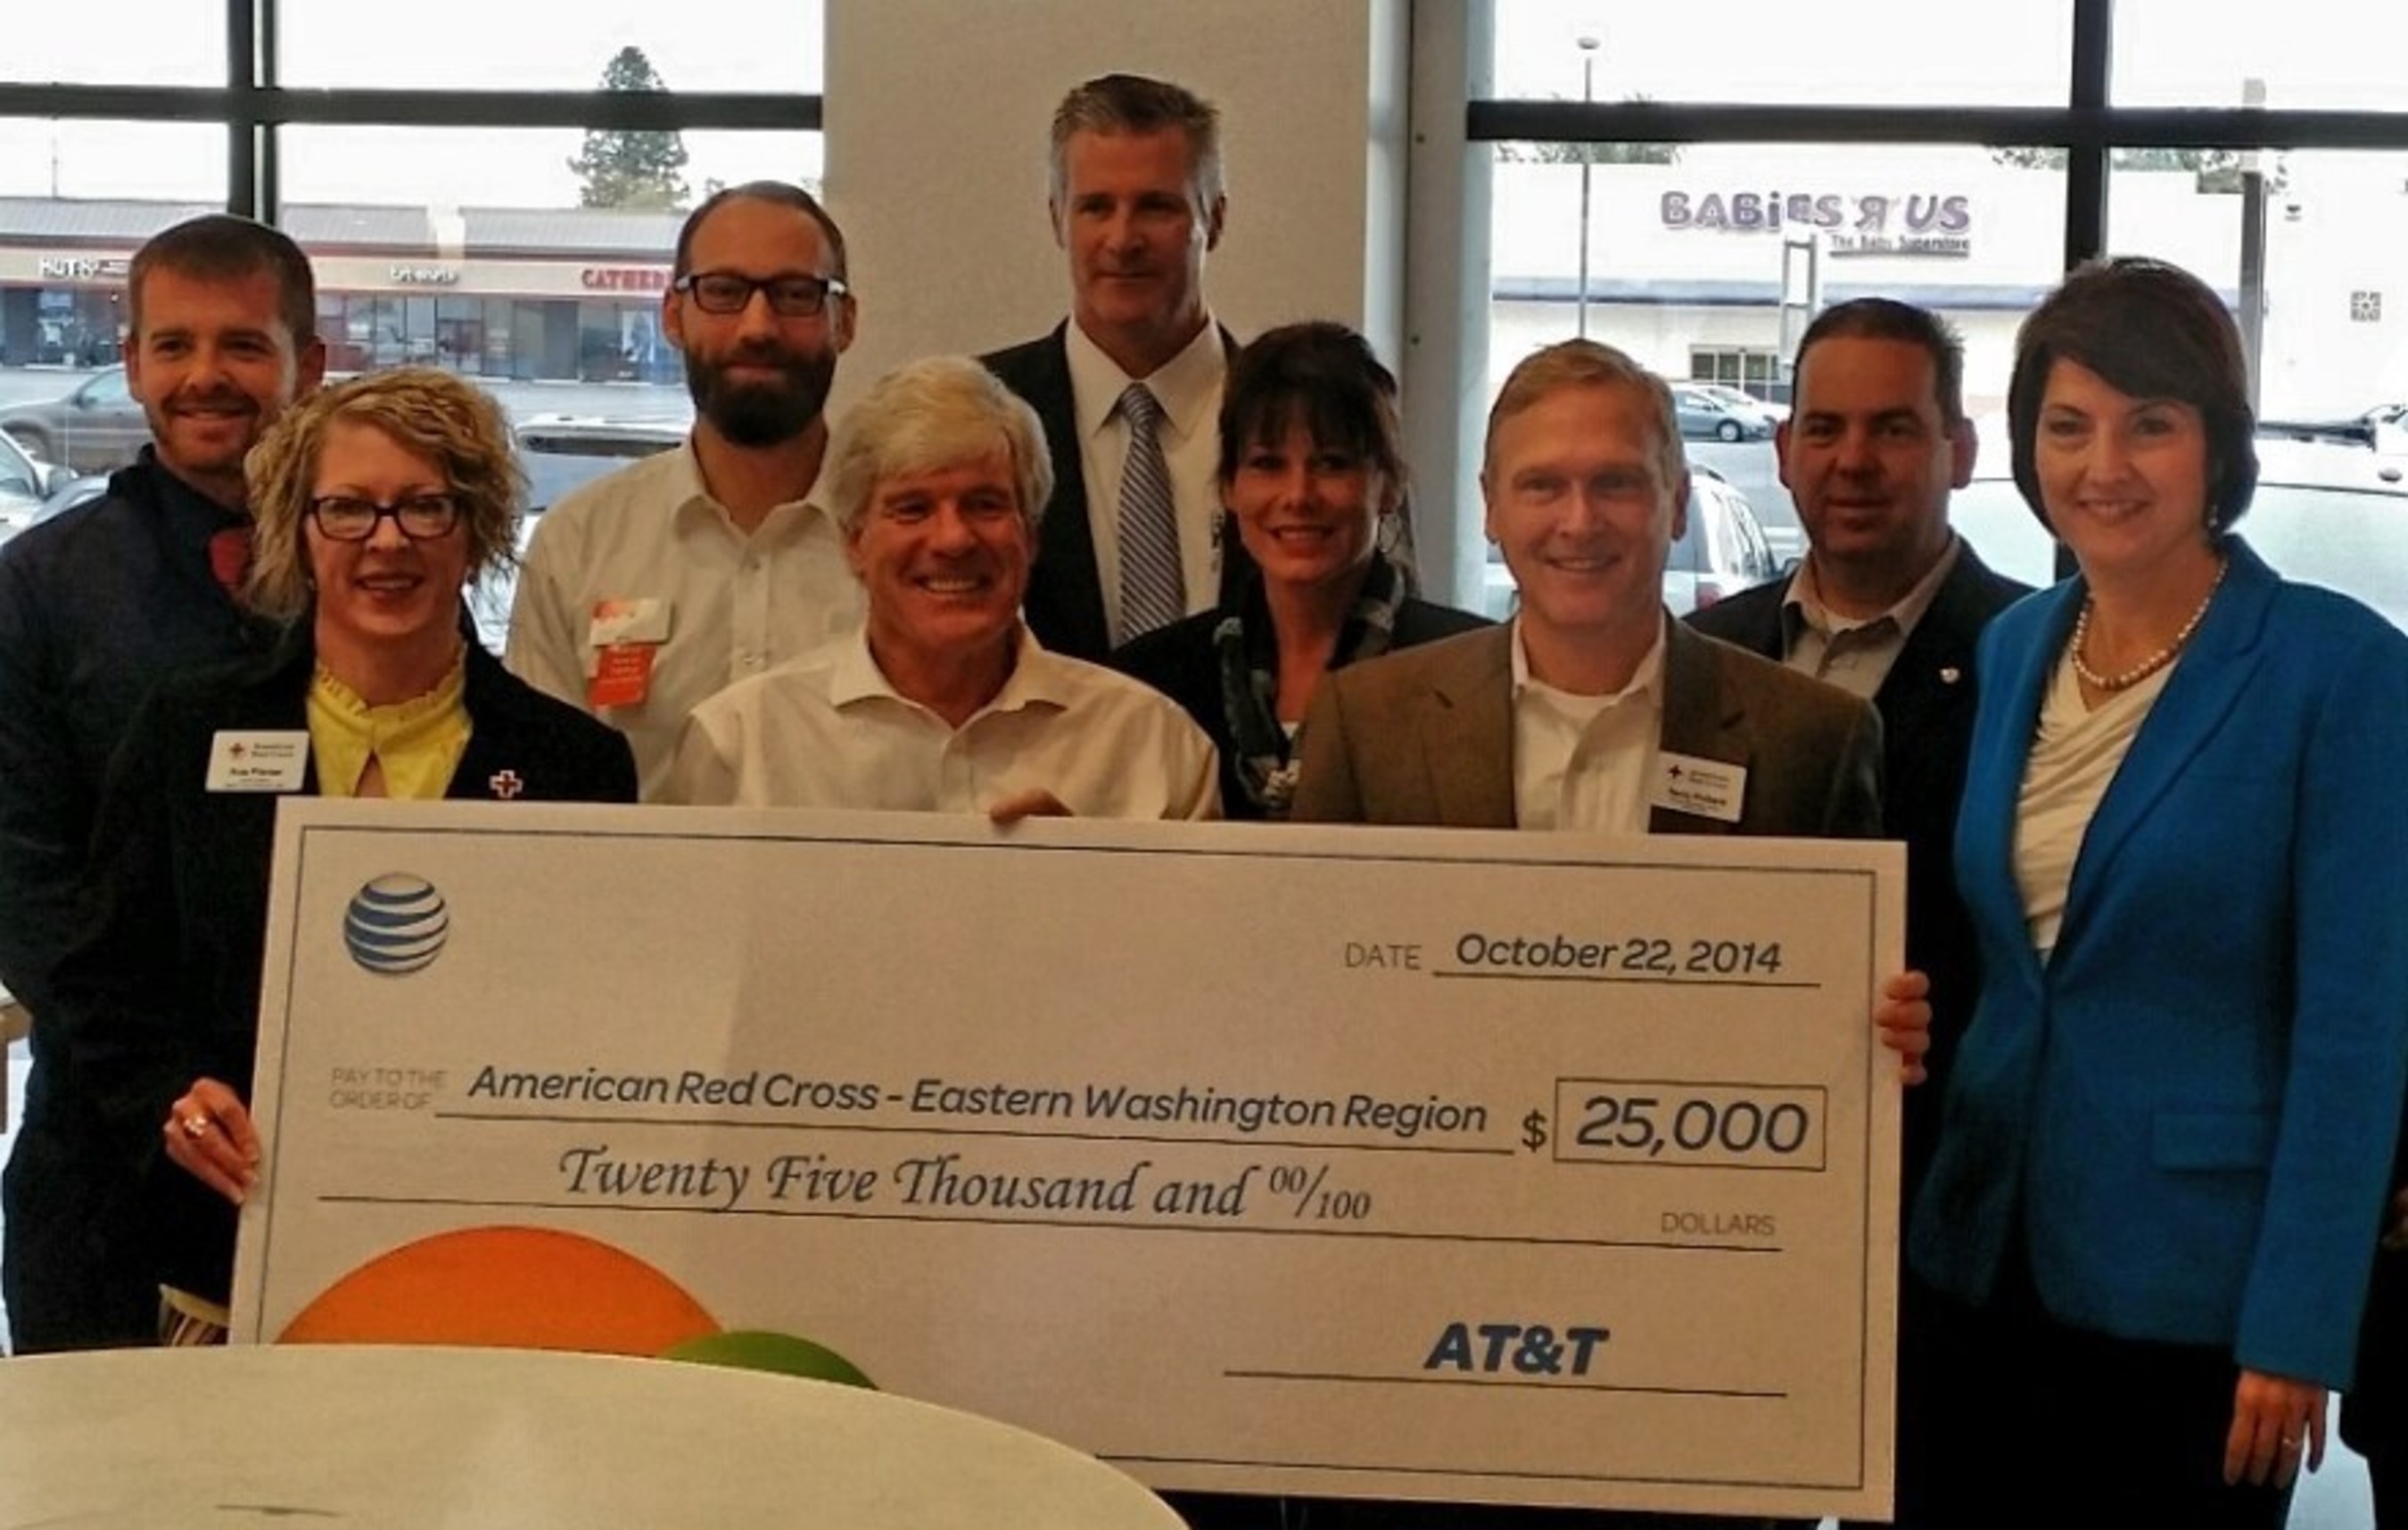 Congresswoman Cathy McMorris Rodgers (right) Joins AT&T personnel and American Red Cross representatives for innovative, new store opening in Spokane with $25,000 donation to American Red Cross Inland Northwest Region.